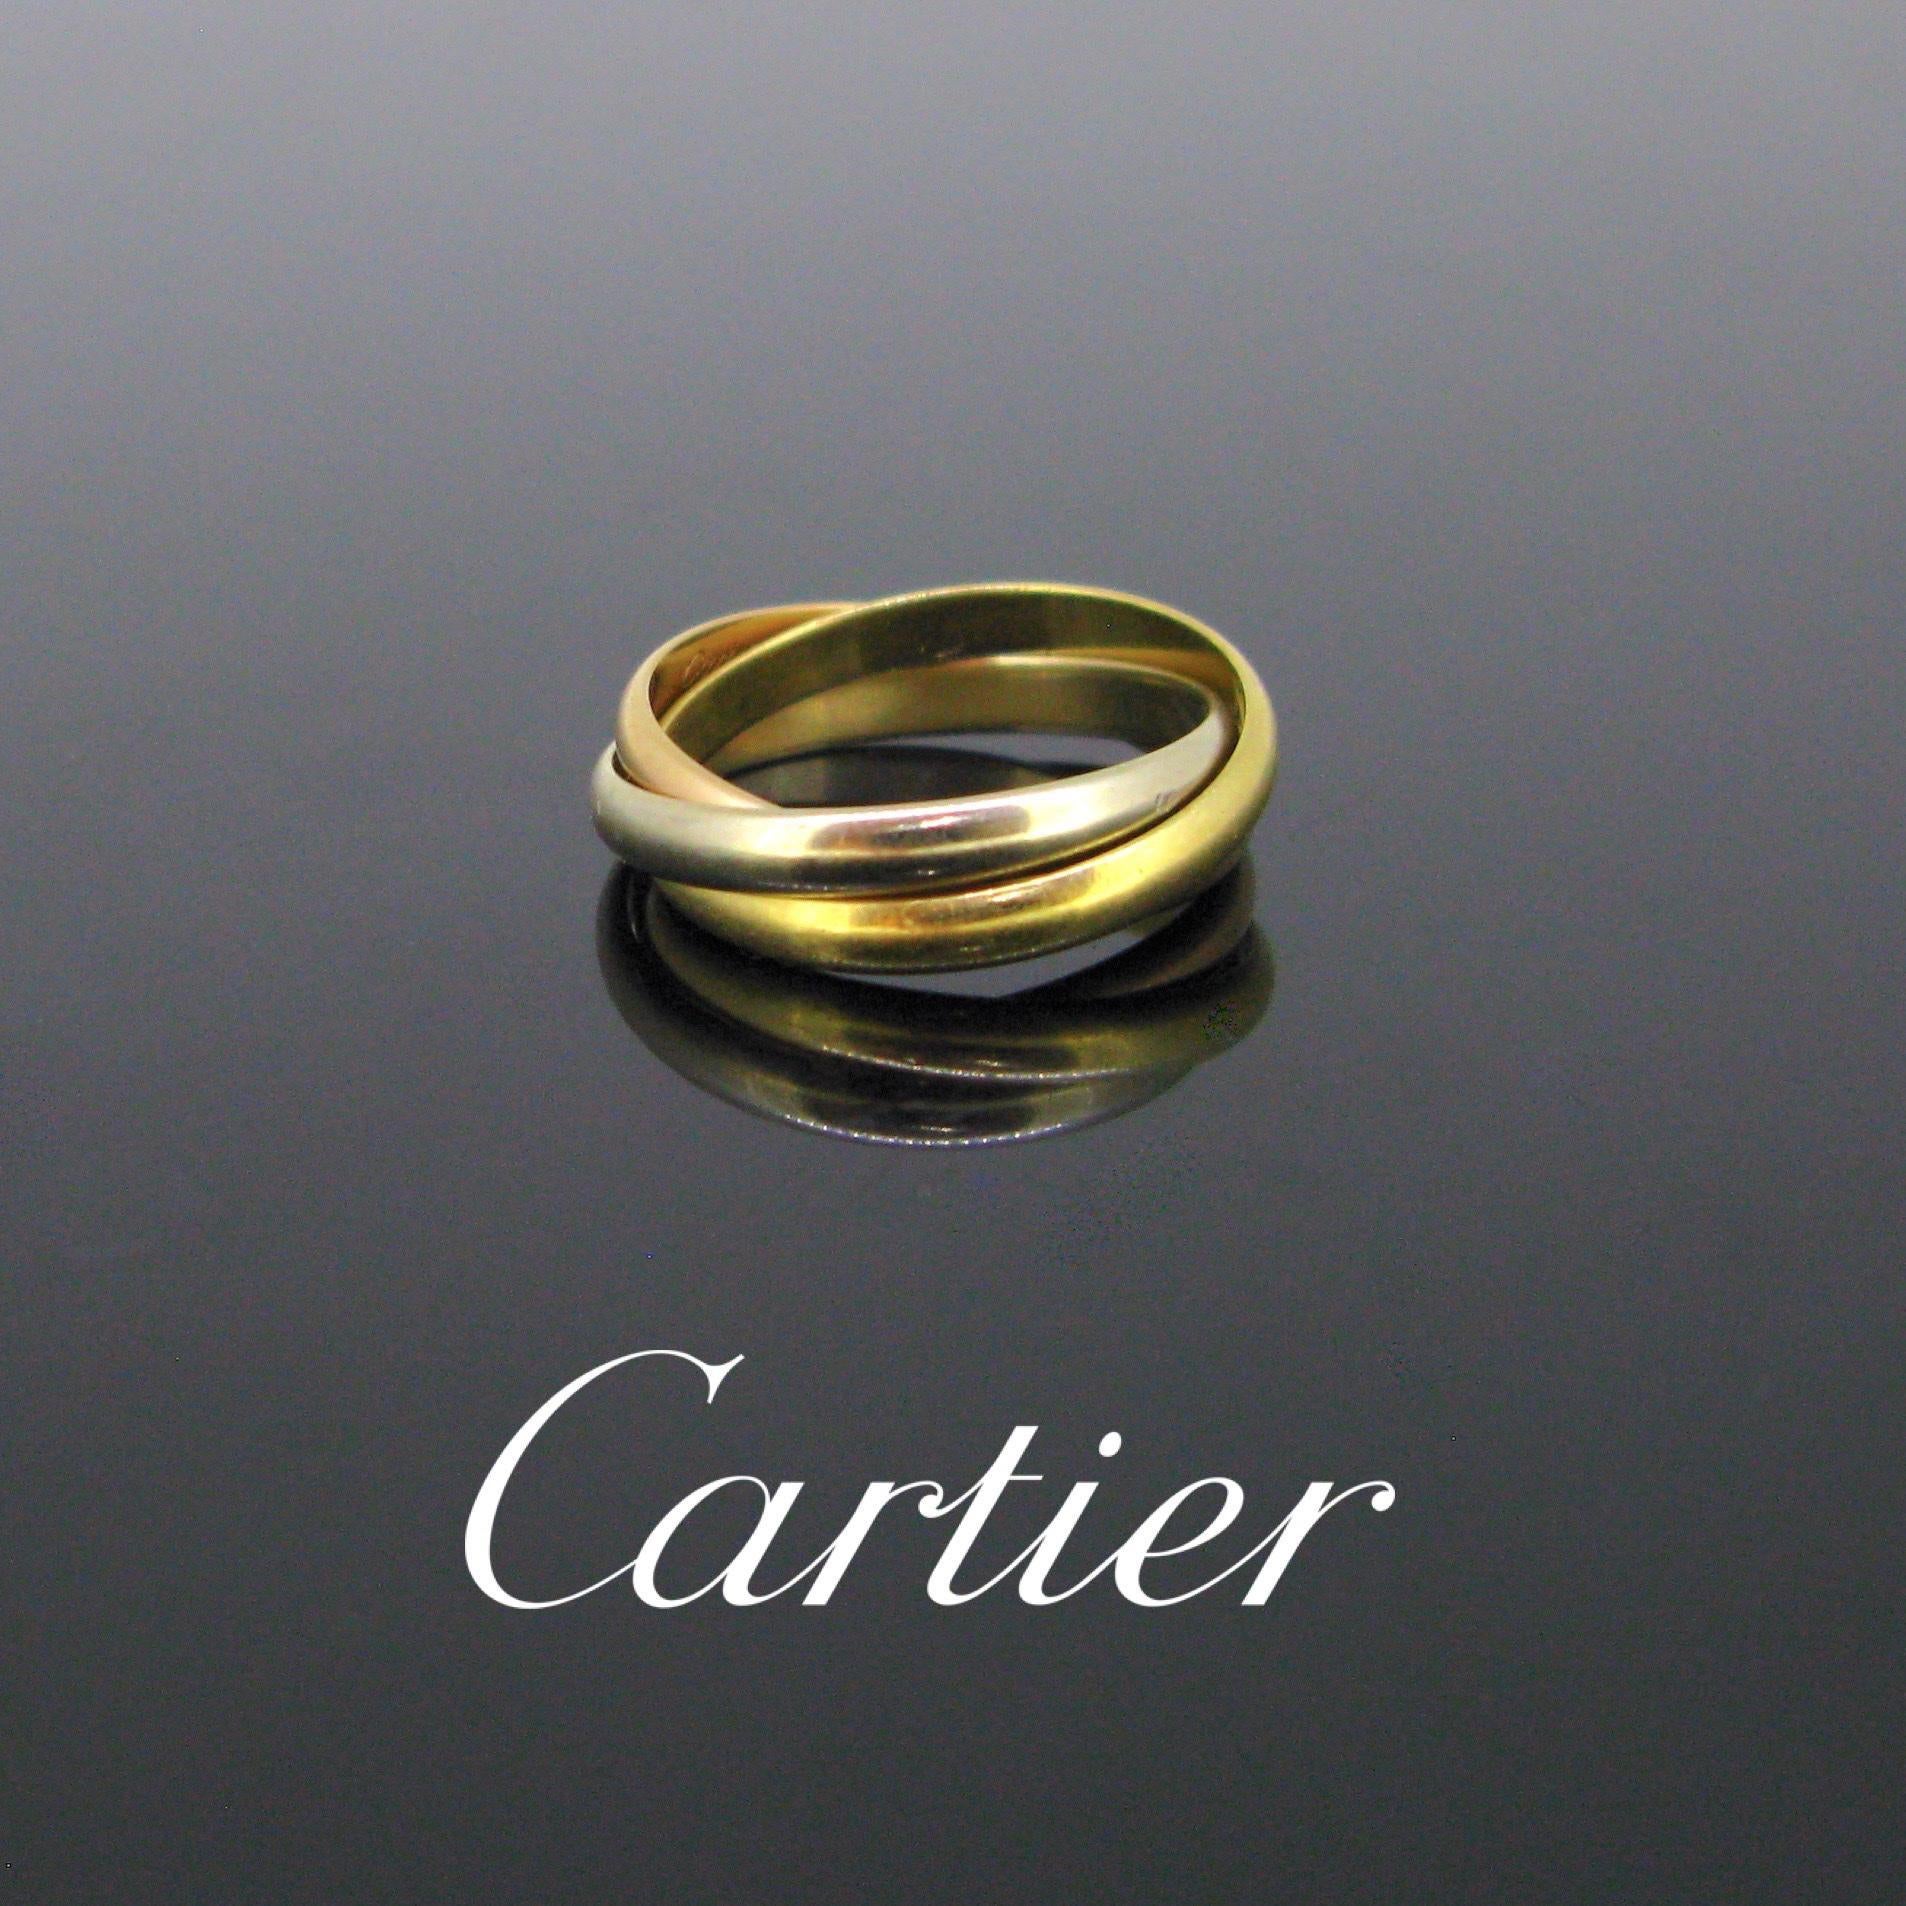 Weight:	4.8 gr


Metal:		18kt yellow, white, rose gold


Signature:	Cartier Paris 750


Ring size:	51 - 5 ½ - L 


Condition:	Very Good


Hallmarks:	French, eagle’s head and maker’s mark on each band


Comments: 	This timeless ring comprises of 3